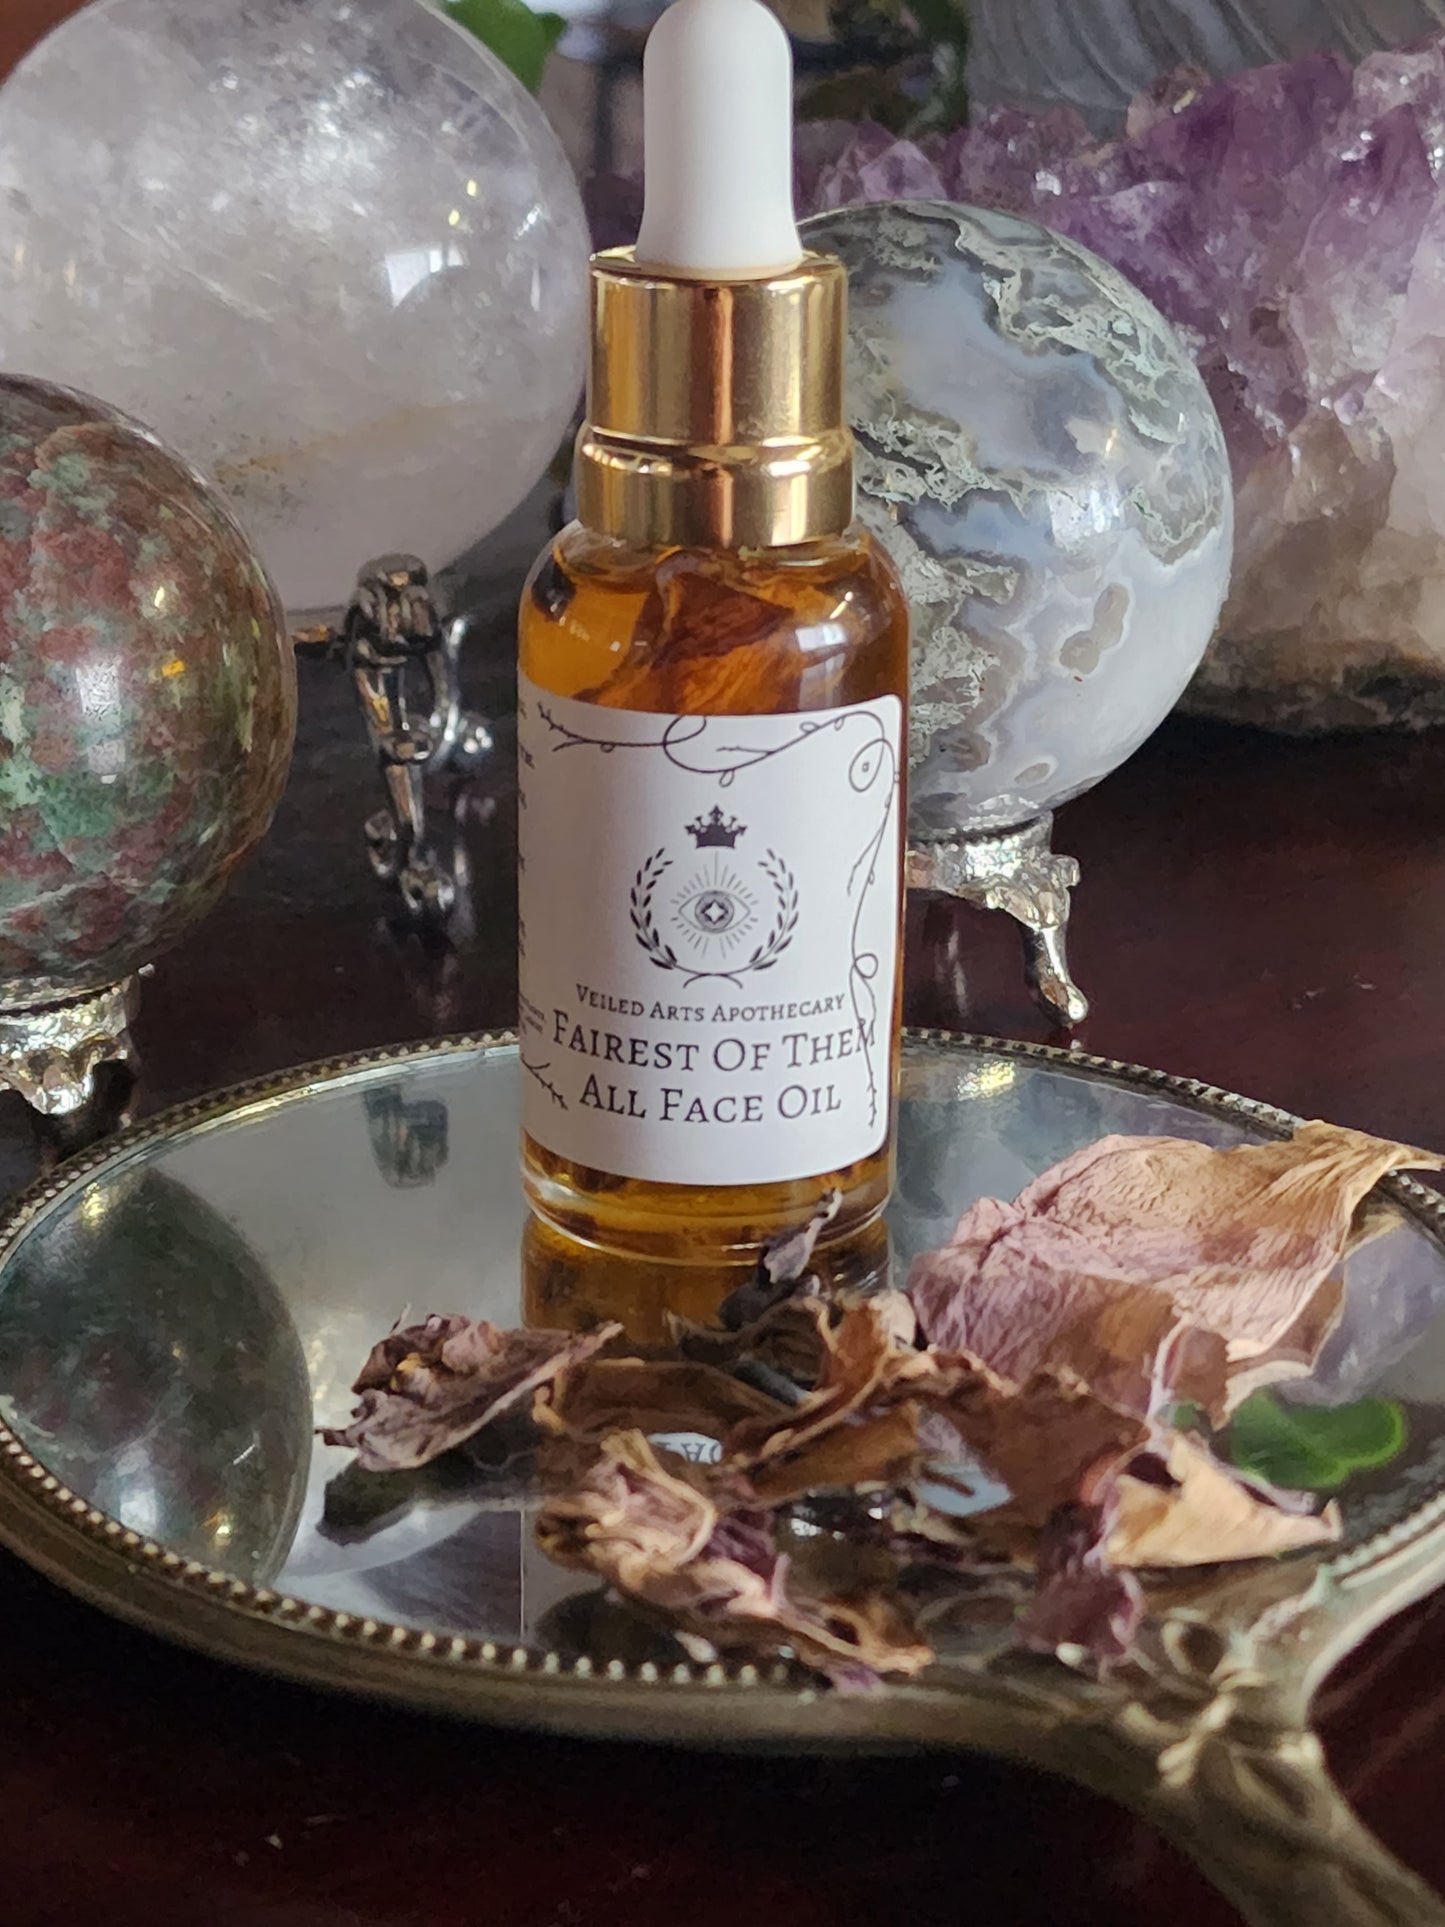 The Fairest of them all Face Oil